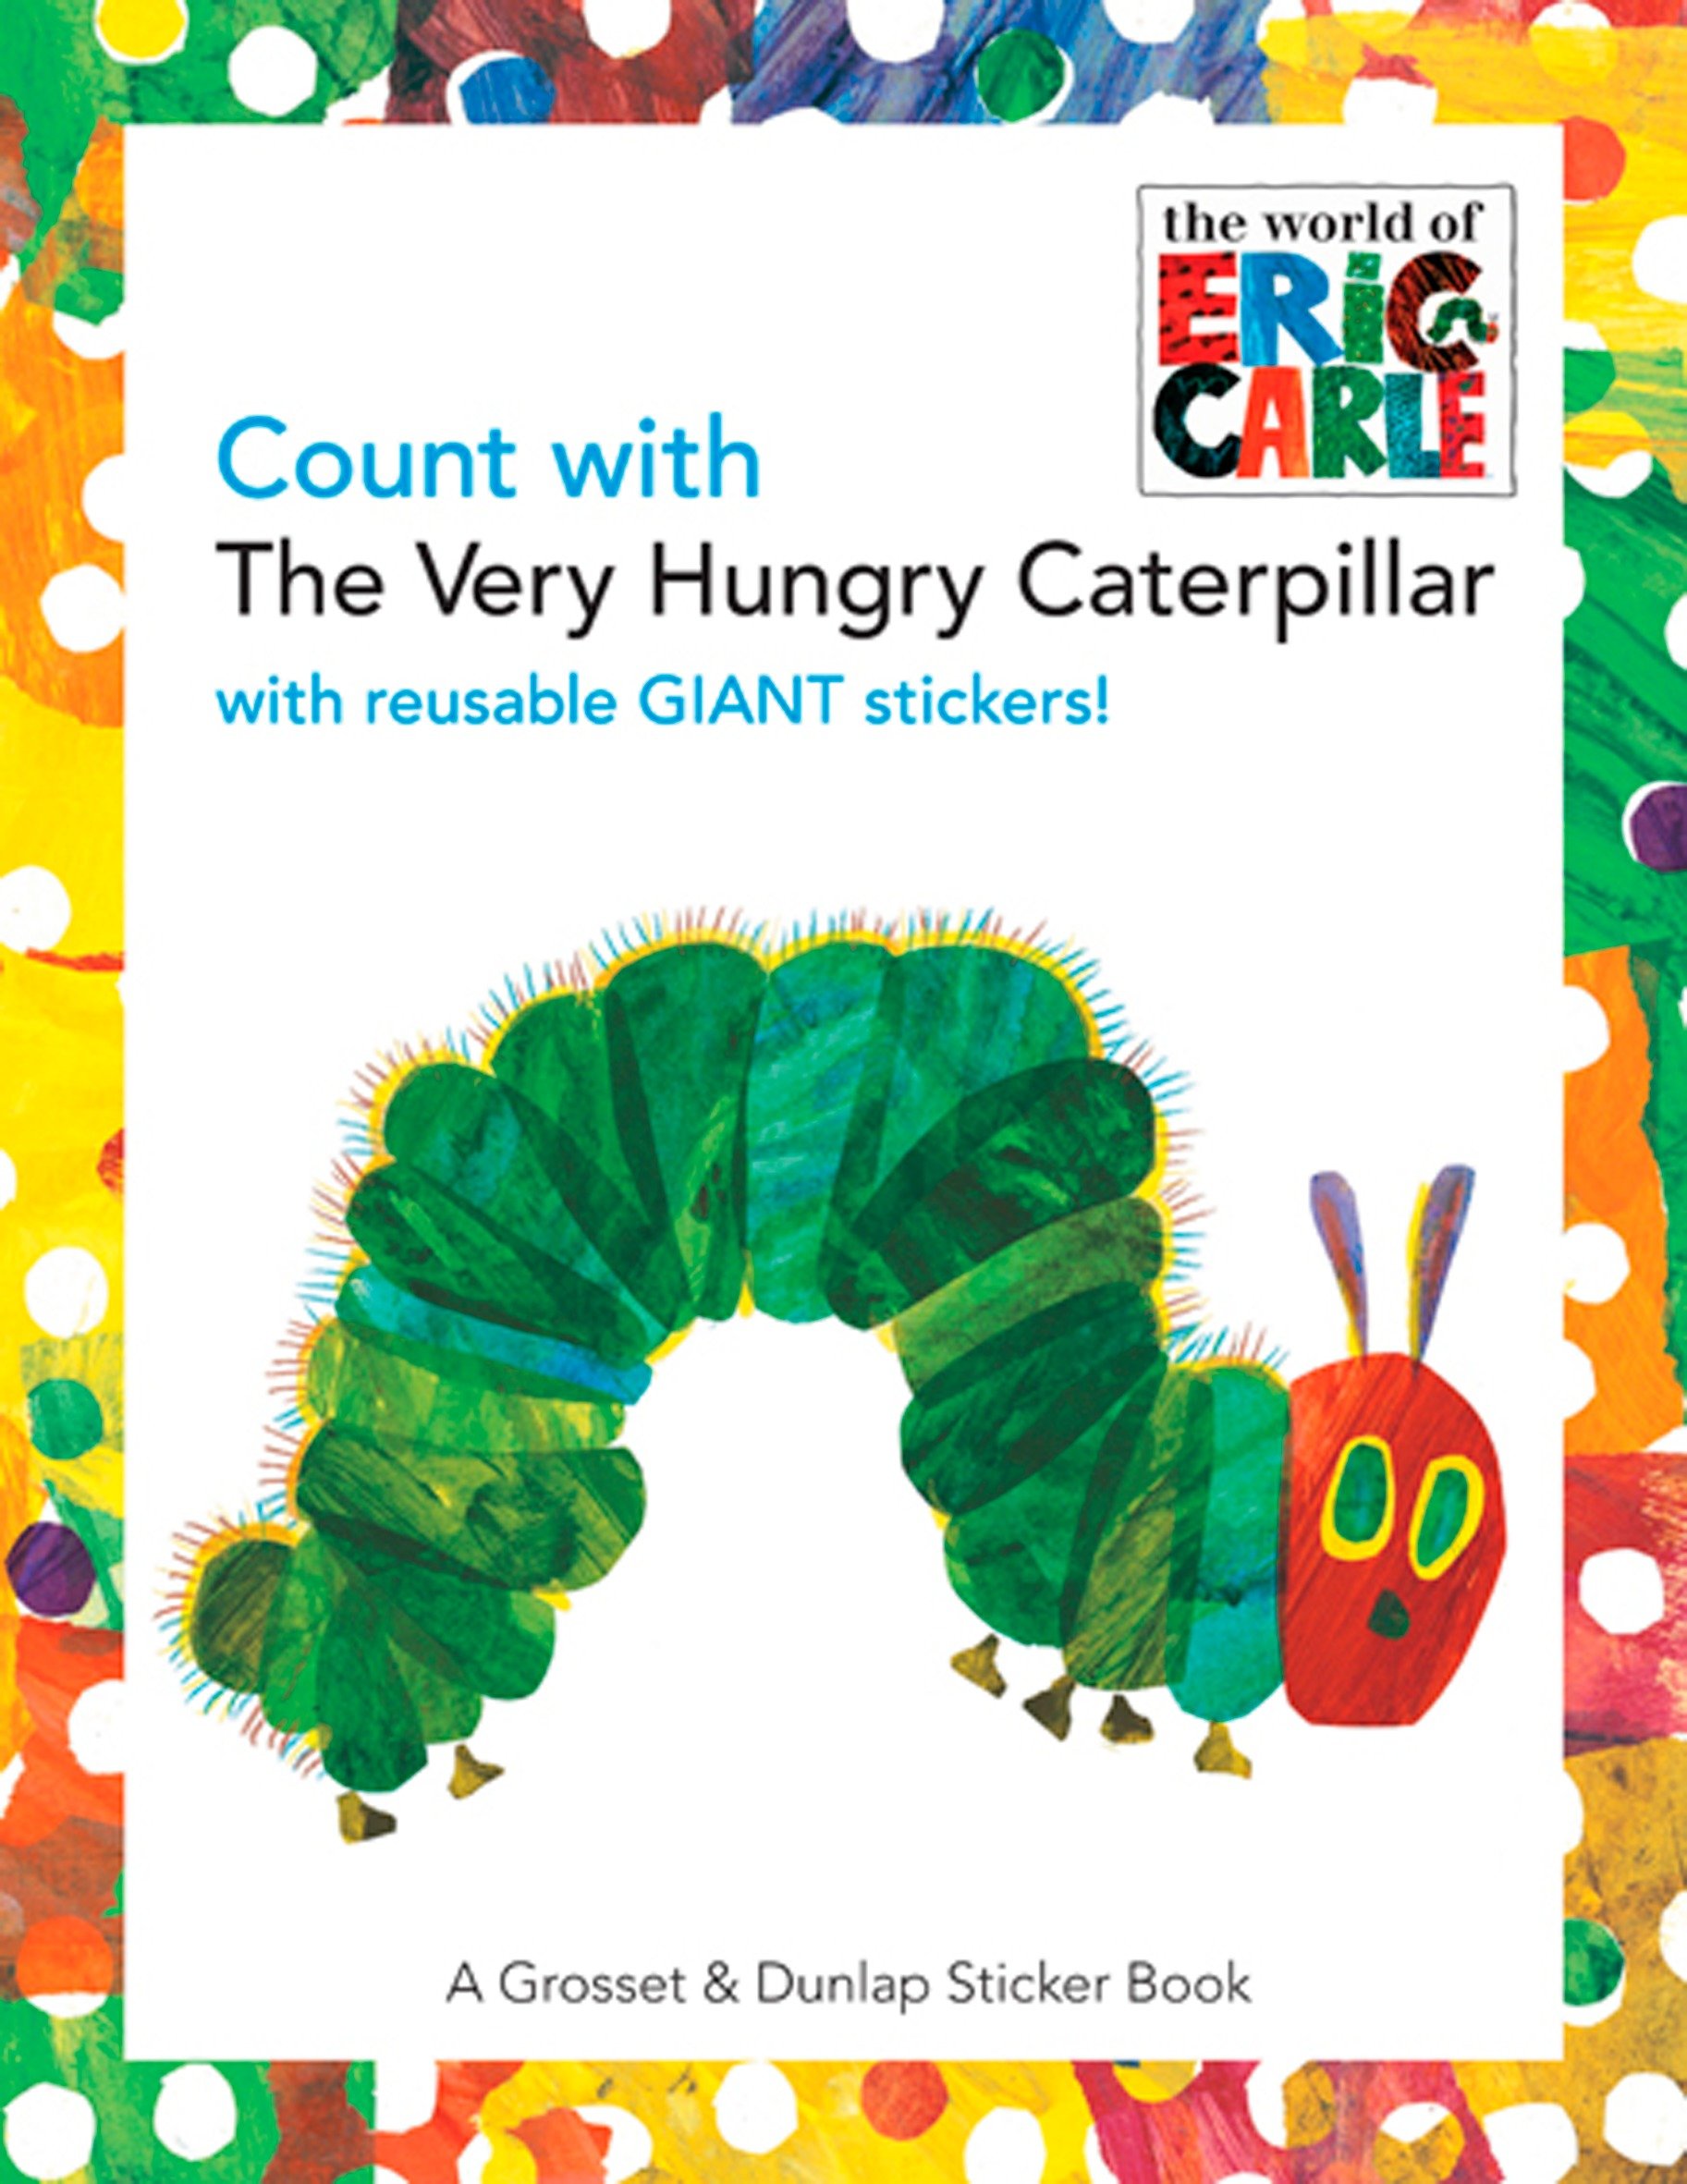 Count With The Very Hungry Caterpillar Sticker Book By Eric Carle